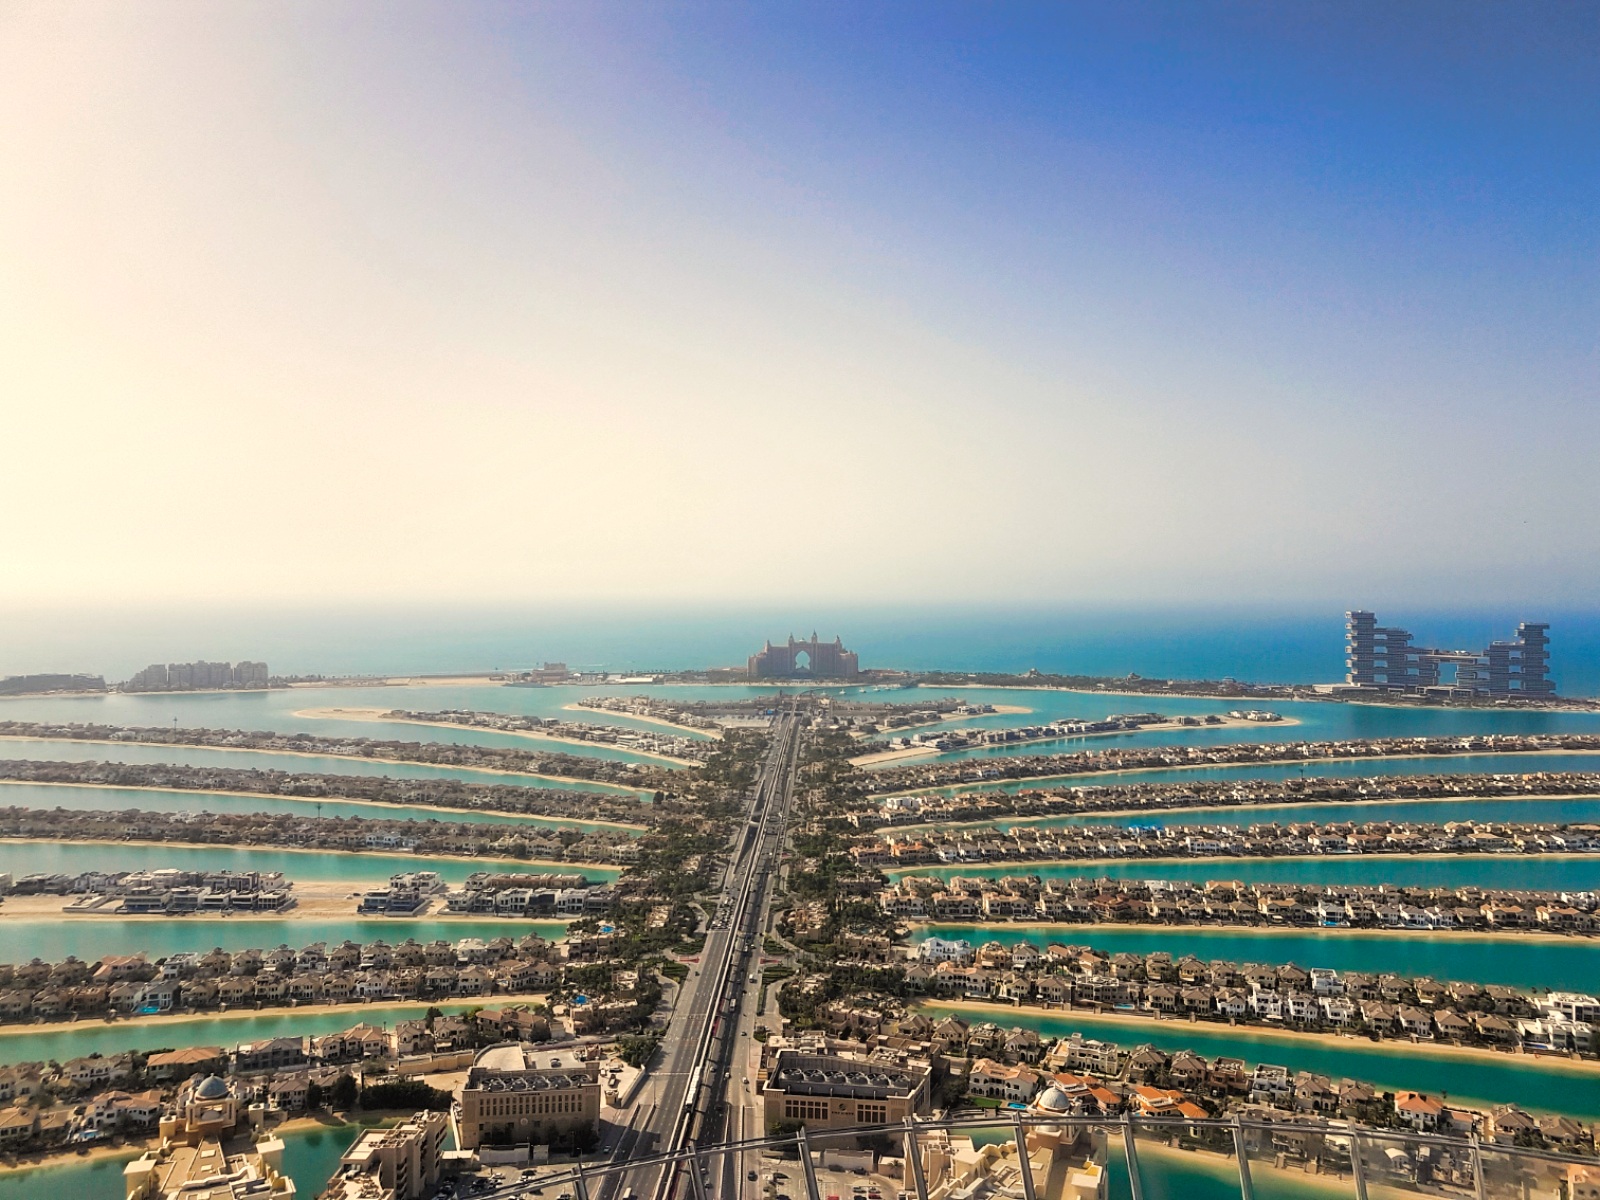 The View at the Palm Dubai Observatory - Palm Jumeirah observation deck